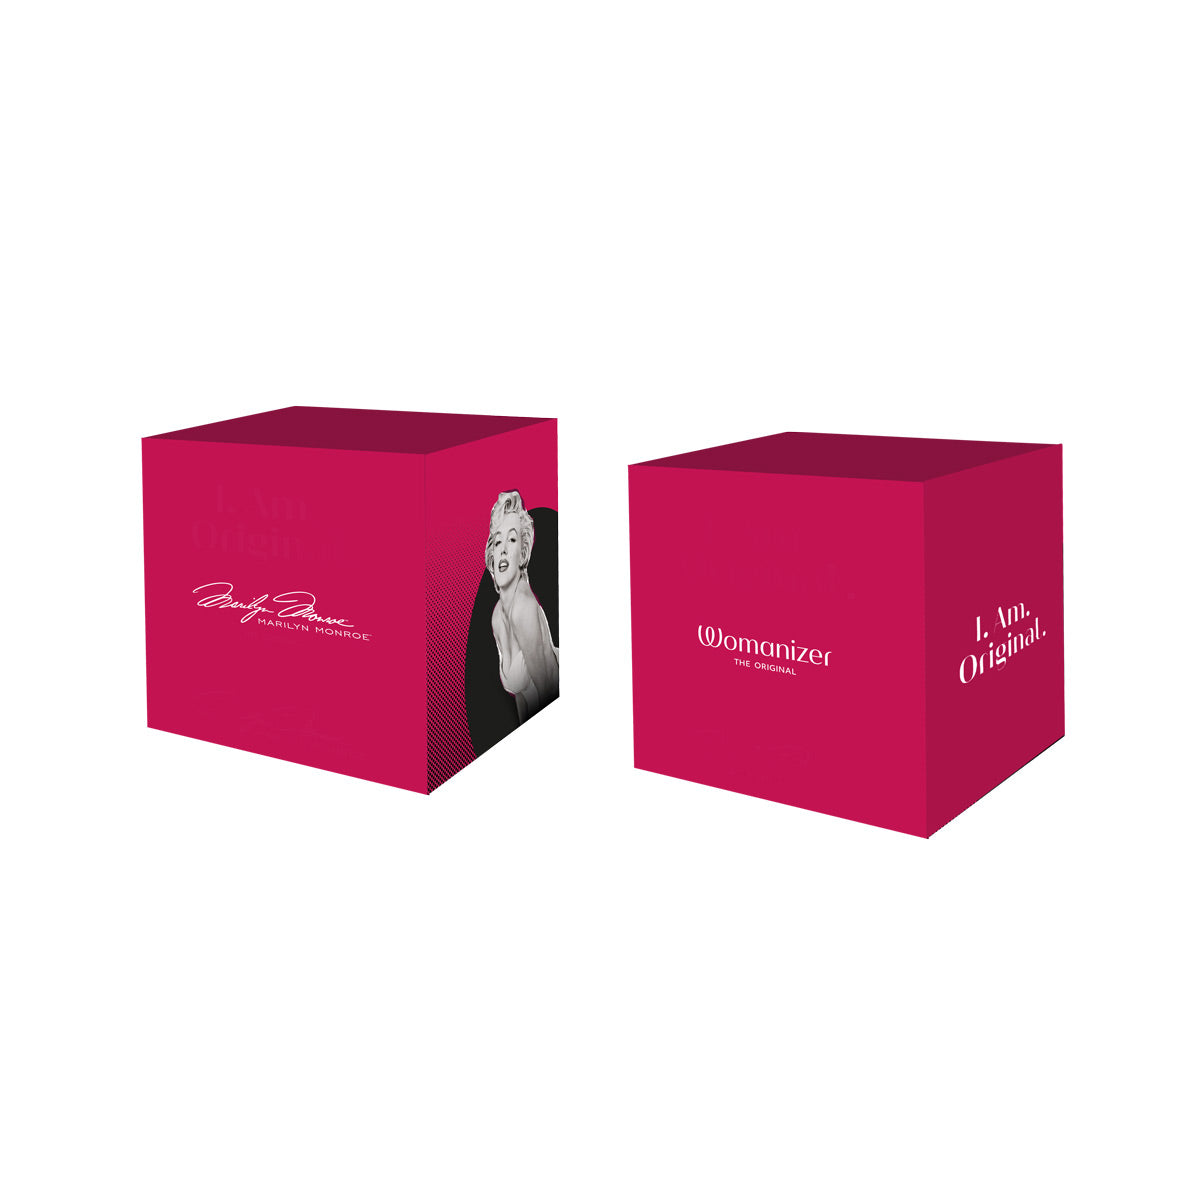 Womanizer - Marilyn Monroe™ Special Edition - SMALL BOX